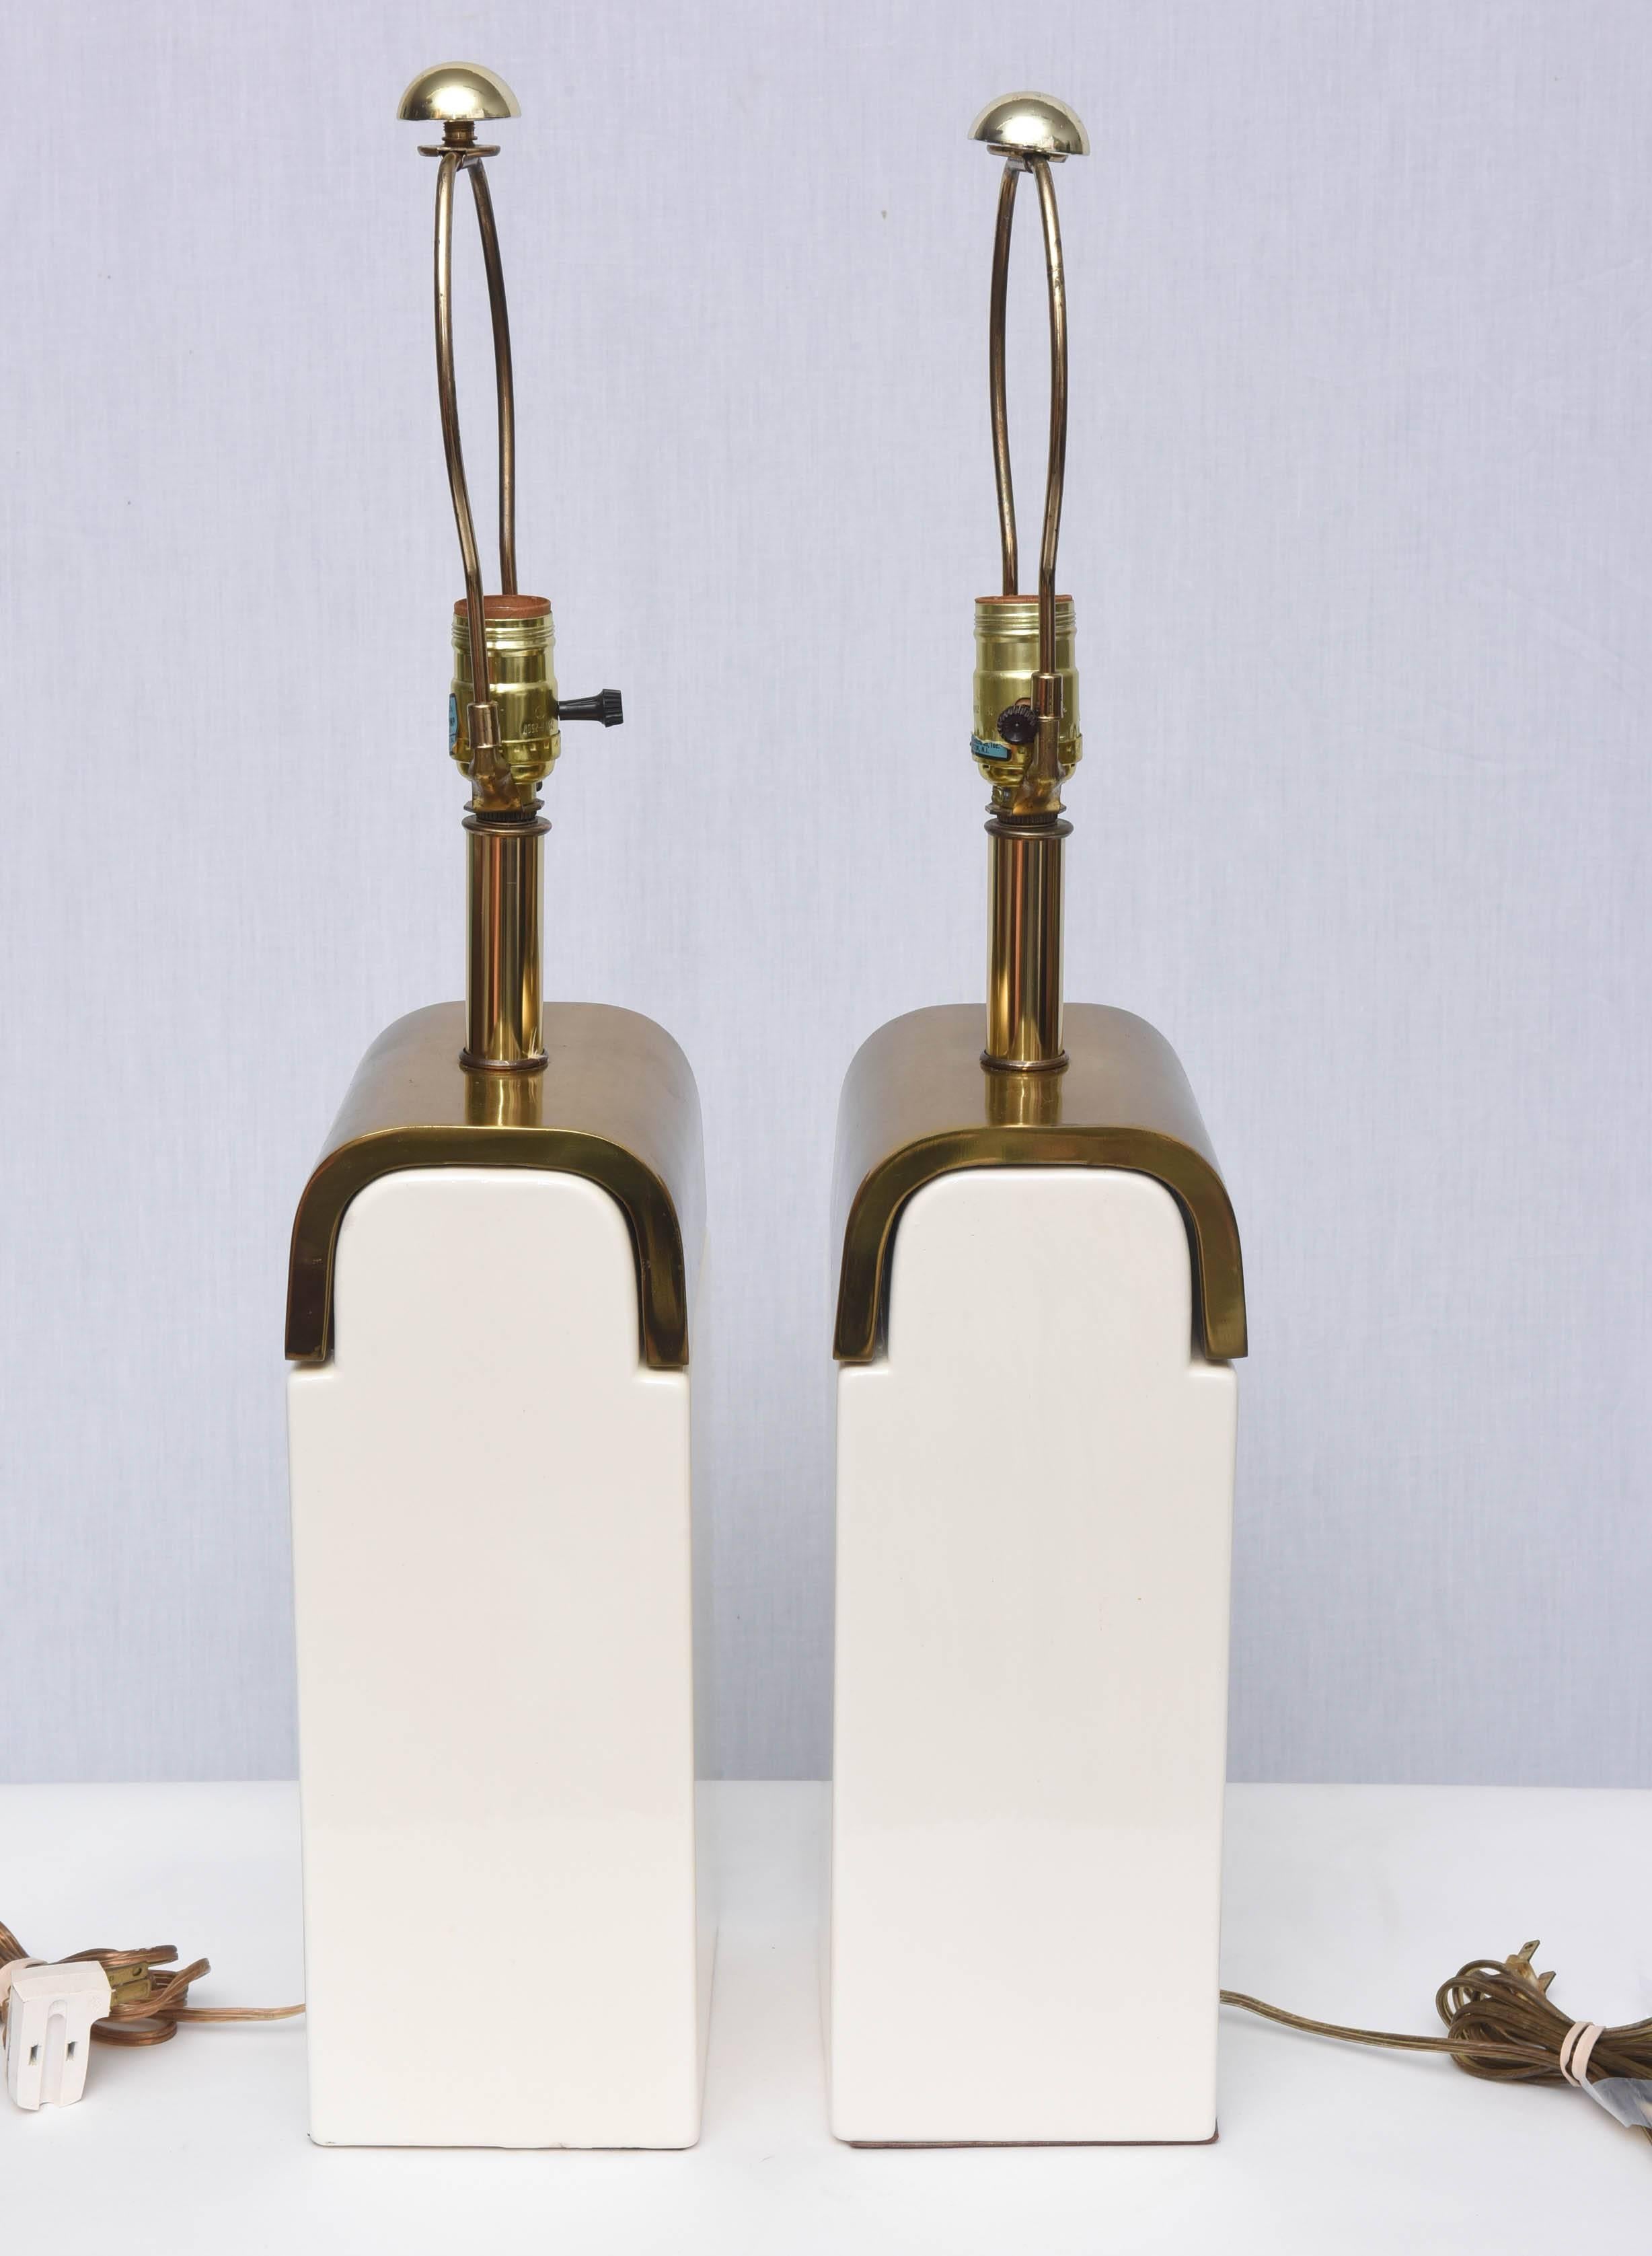 American Pair of Amazing Mid-Century Ceramic and Brass Lamps, 1950s, USA